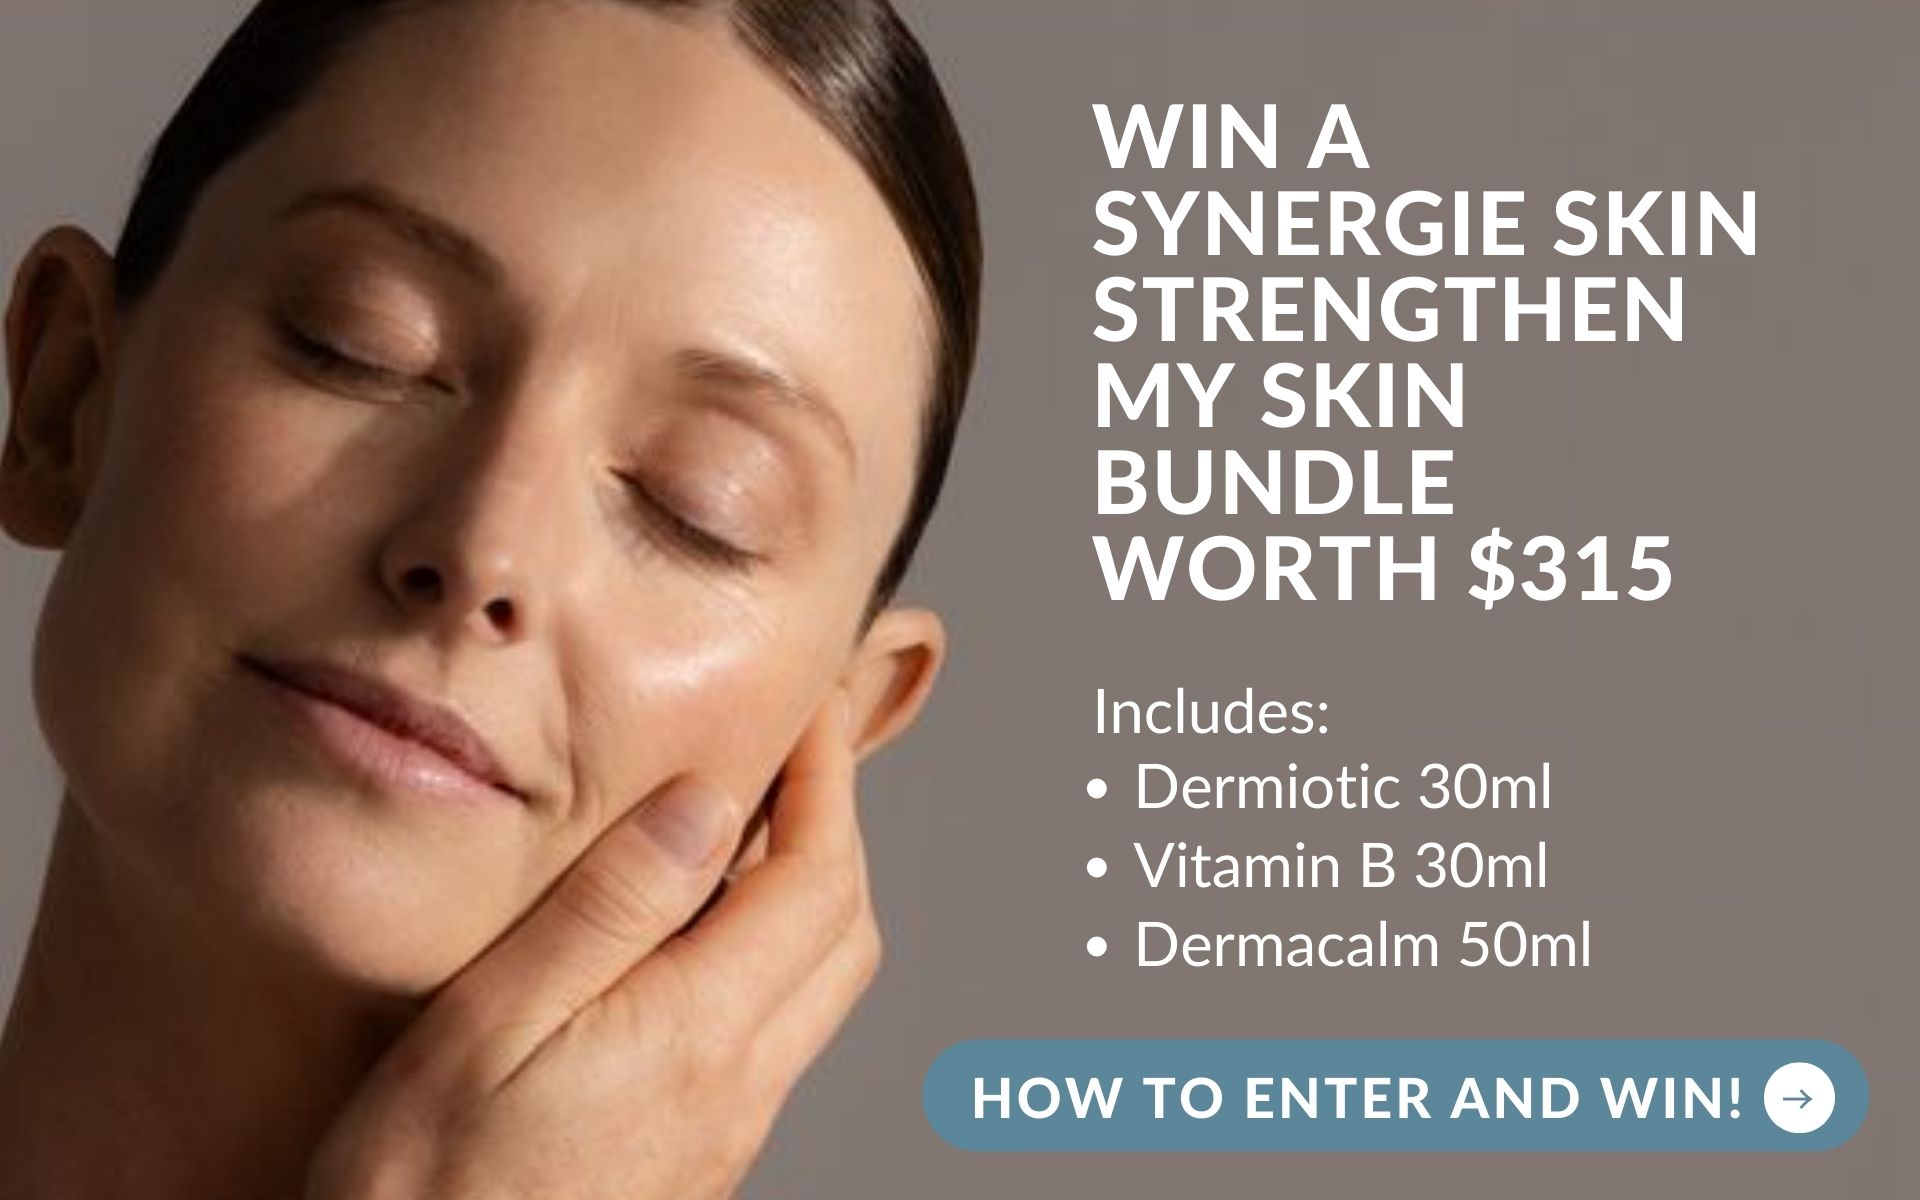 Win a Synergie Skin Strengthen Your Skin Bundle worth $315. Minimum spend $149 on Synergie. Click for more details.